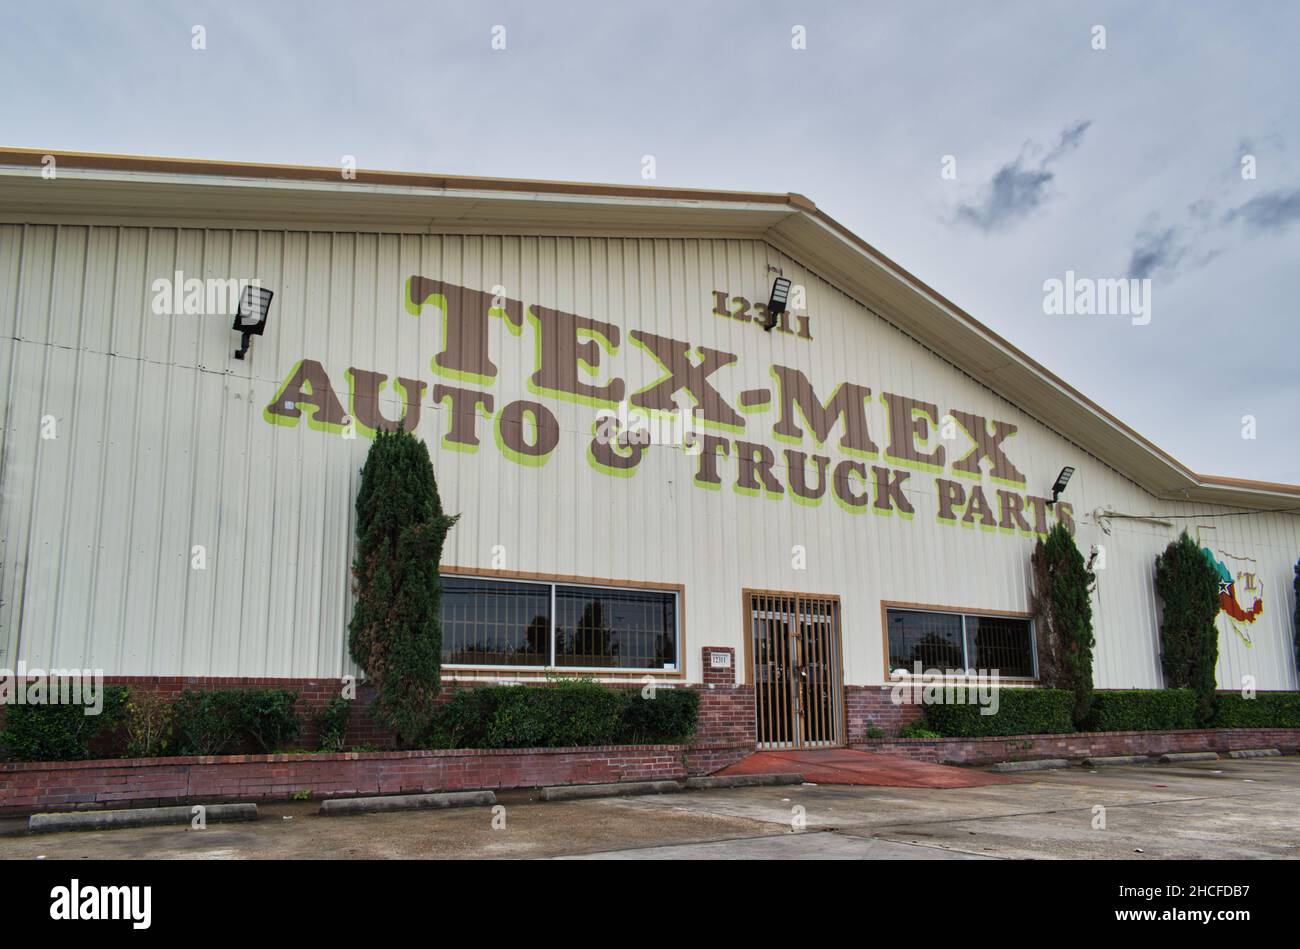 Houston, Texas USA 12-05-2021: Tex-Mex Auto and Truck Parts business exterior in Houston, TX. Local automotive salvage company front entrance. Stock Photo